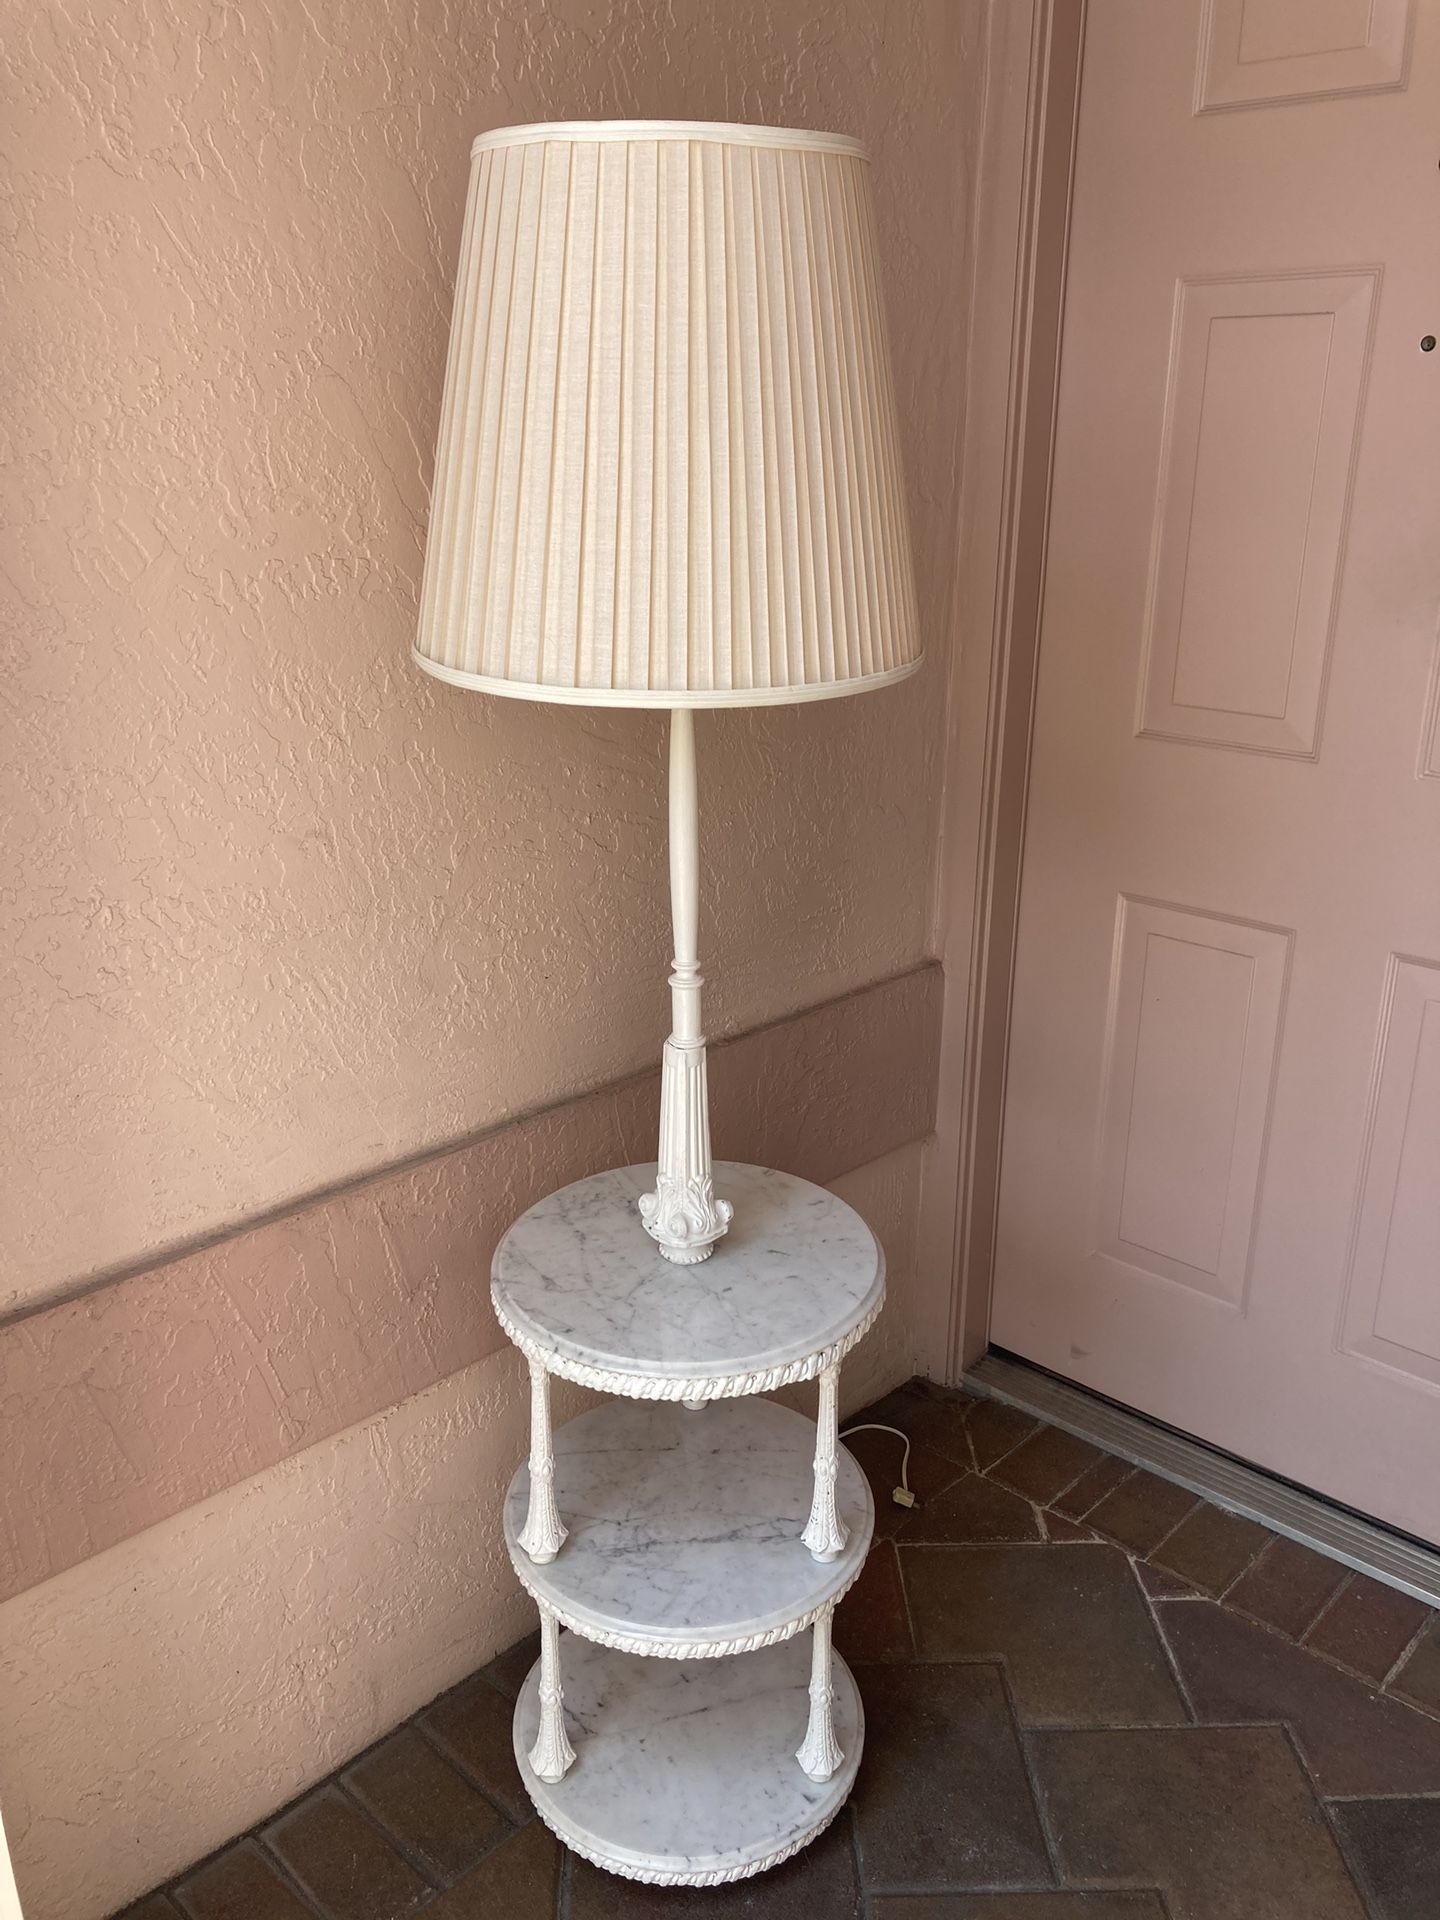 Antique 3 Tier Carrara Marble Floor Stick / Pole Lamp Side / End Table from Estate Home